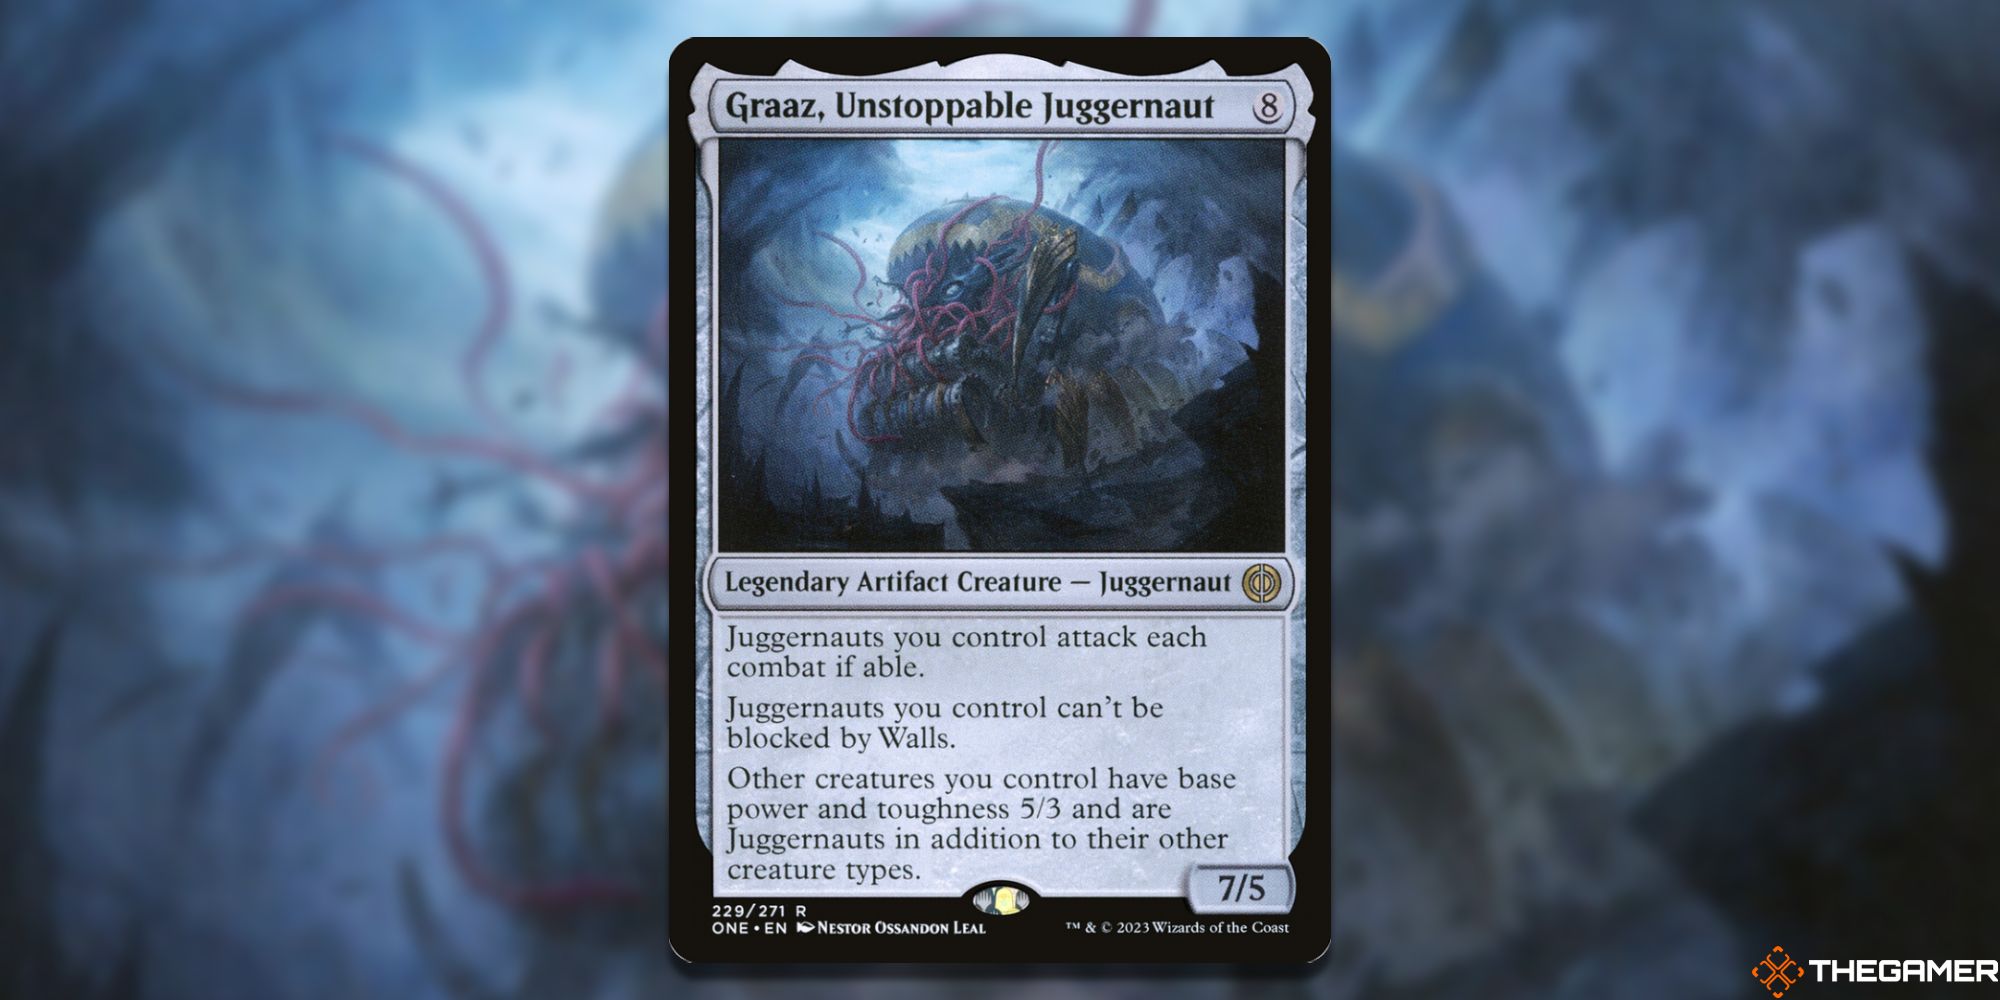 Image of the Graaz, Unstoppable Juggernaut  card in Magic: The Gathering, with art by Nestor Ossandon Leal